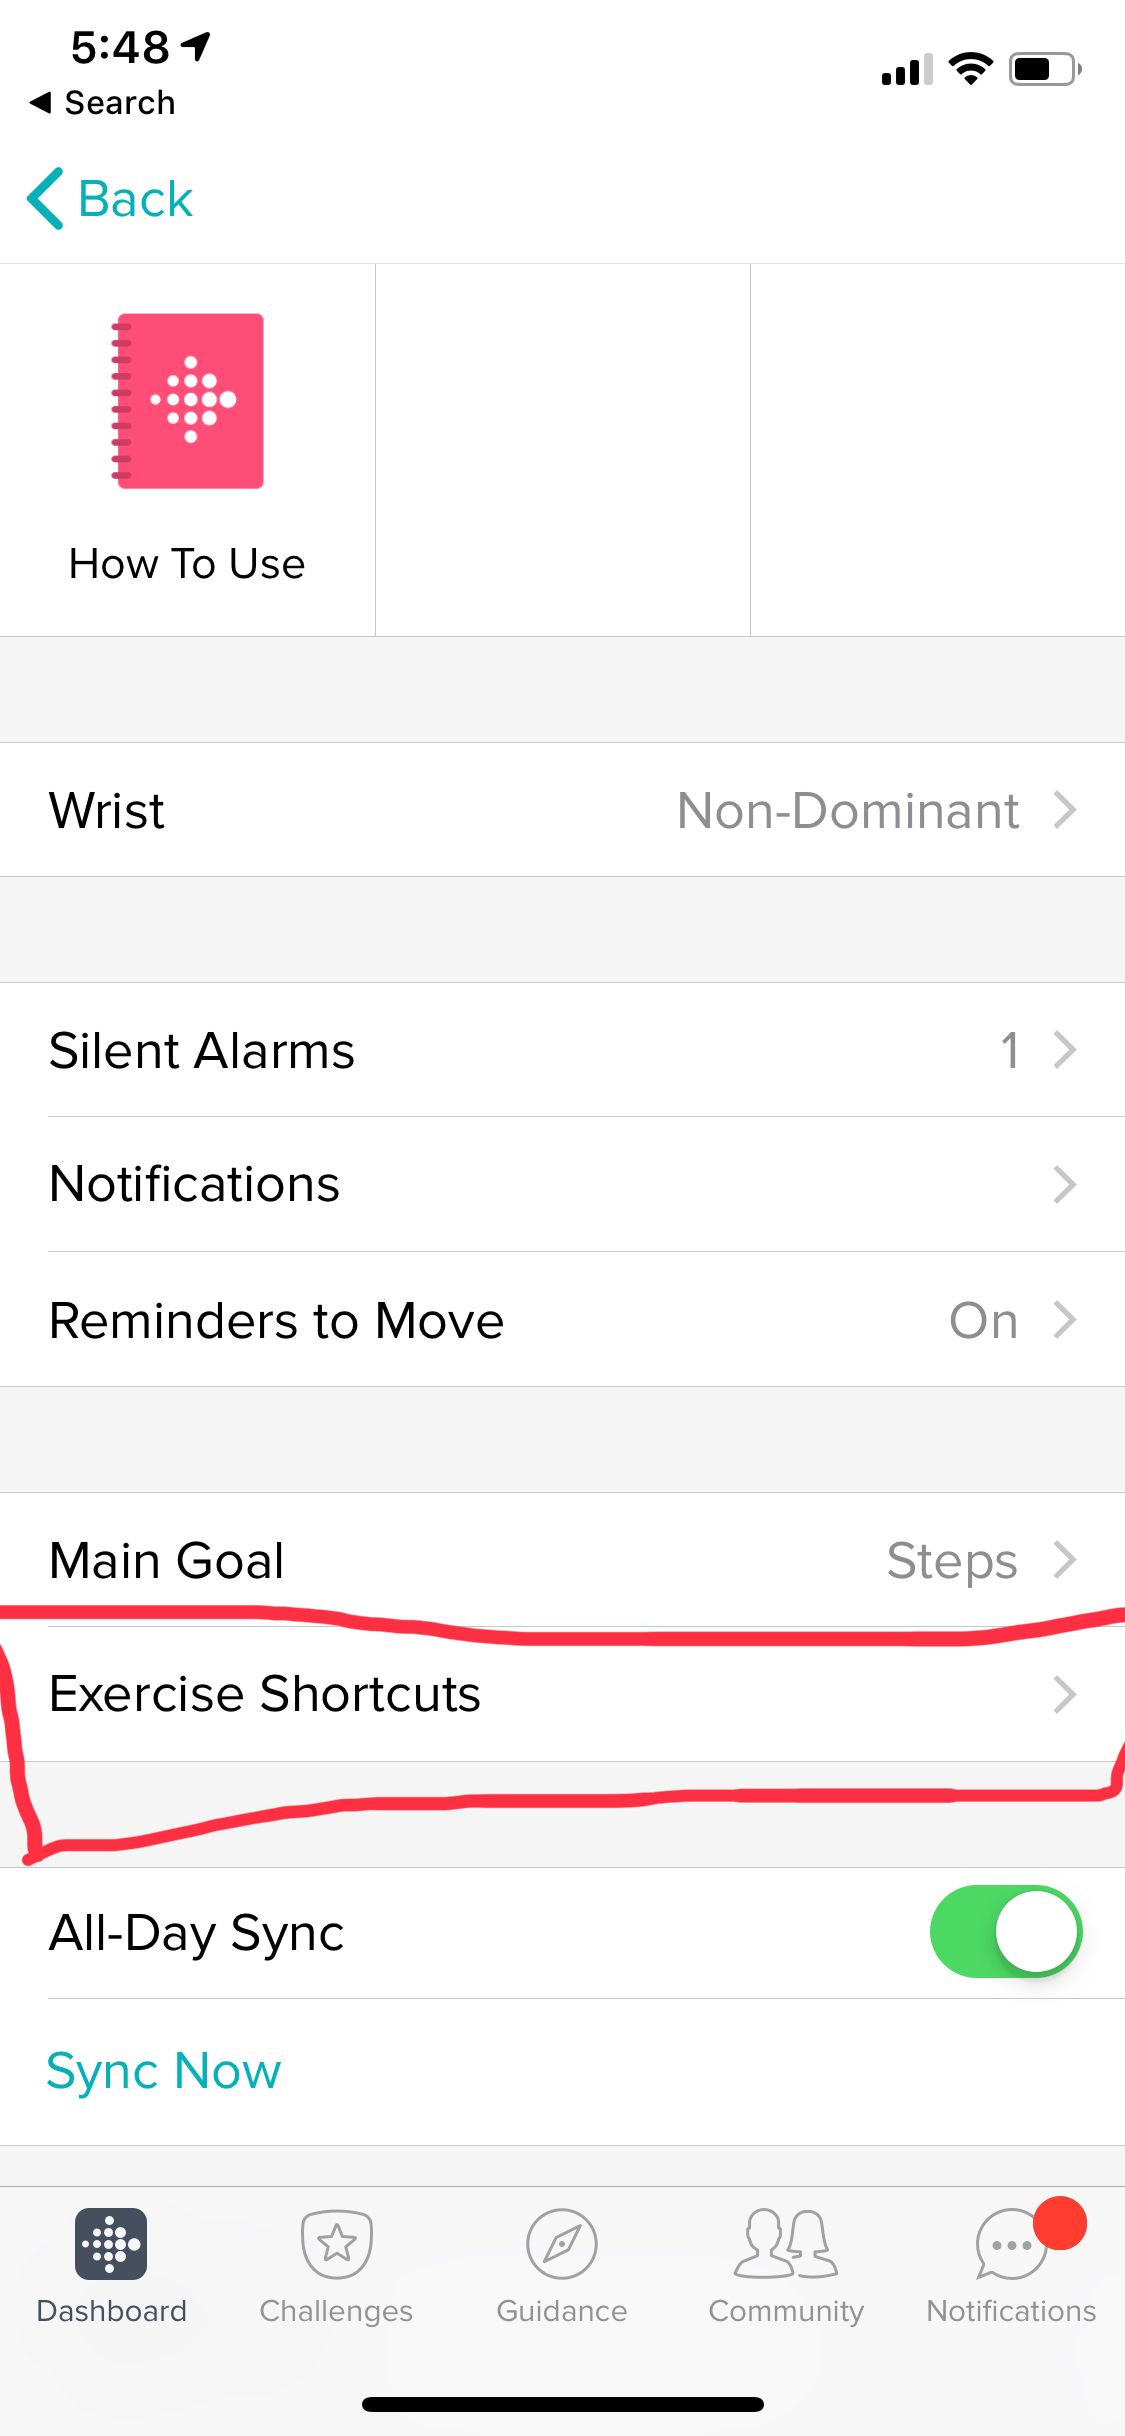 fitbit charge 3 interval workout